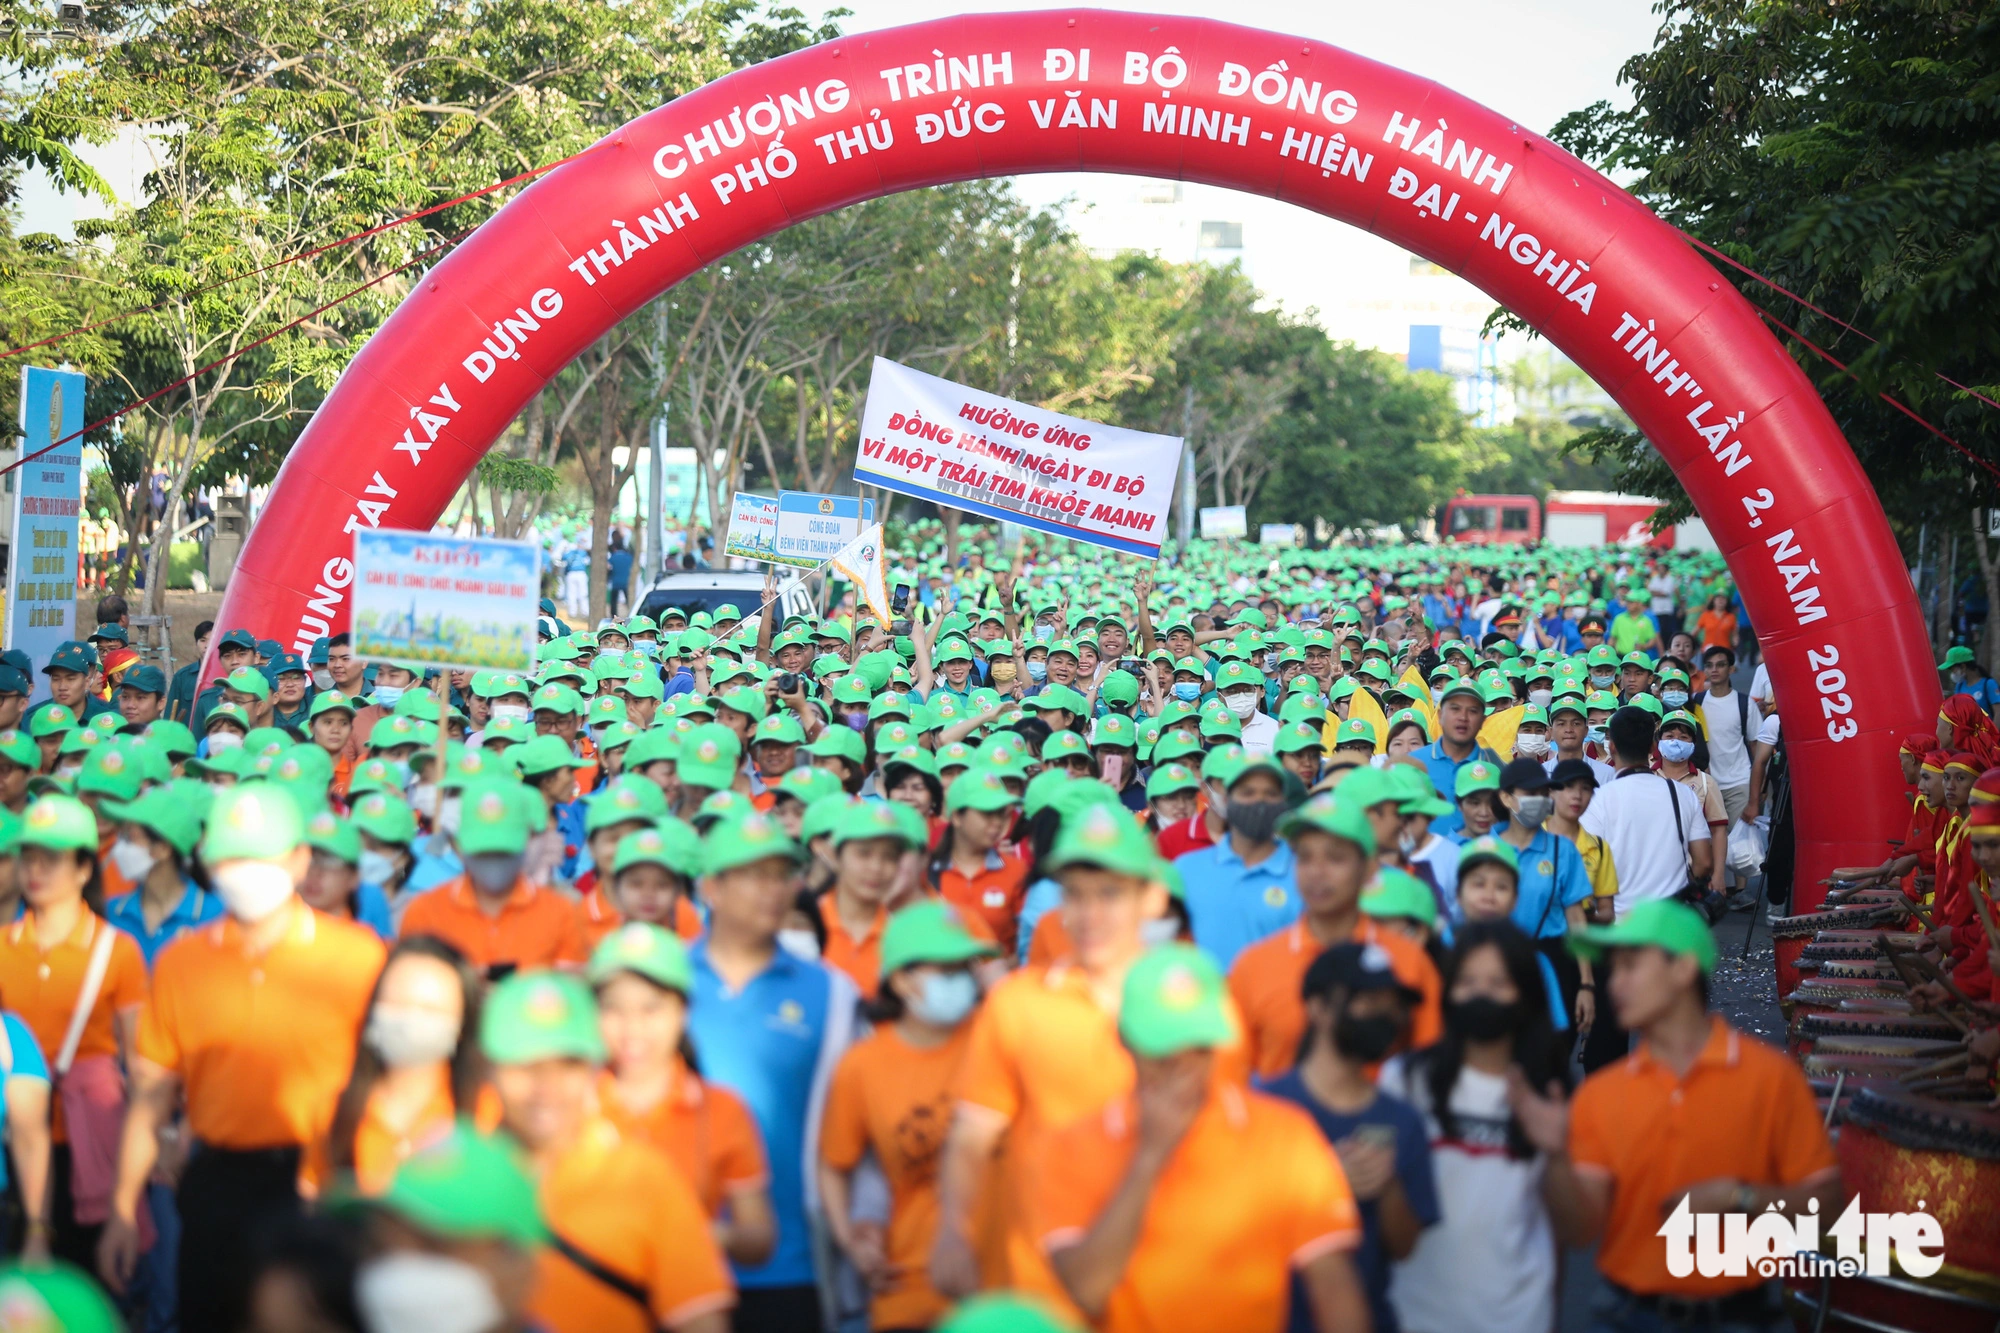 Walkathon in Ho Chi Minh City attracts over 6,000 participants, raises more than $740,000